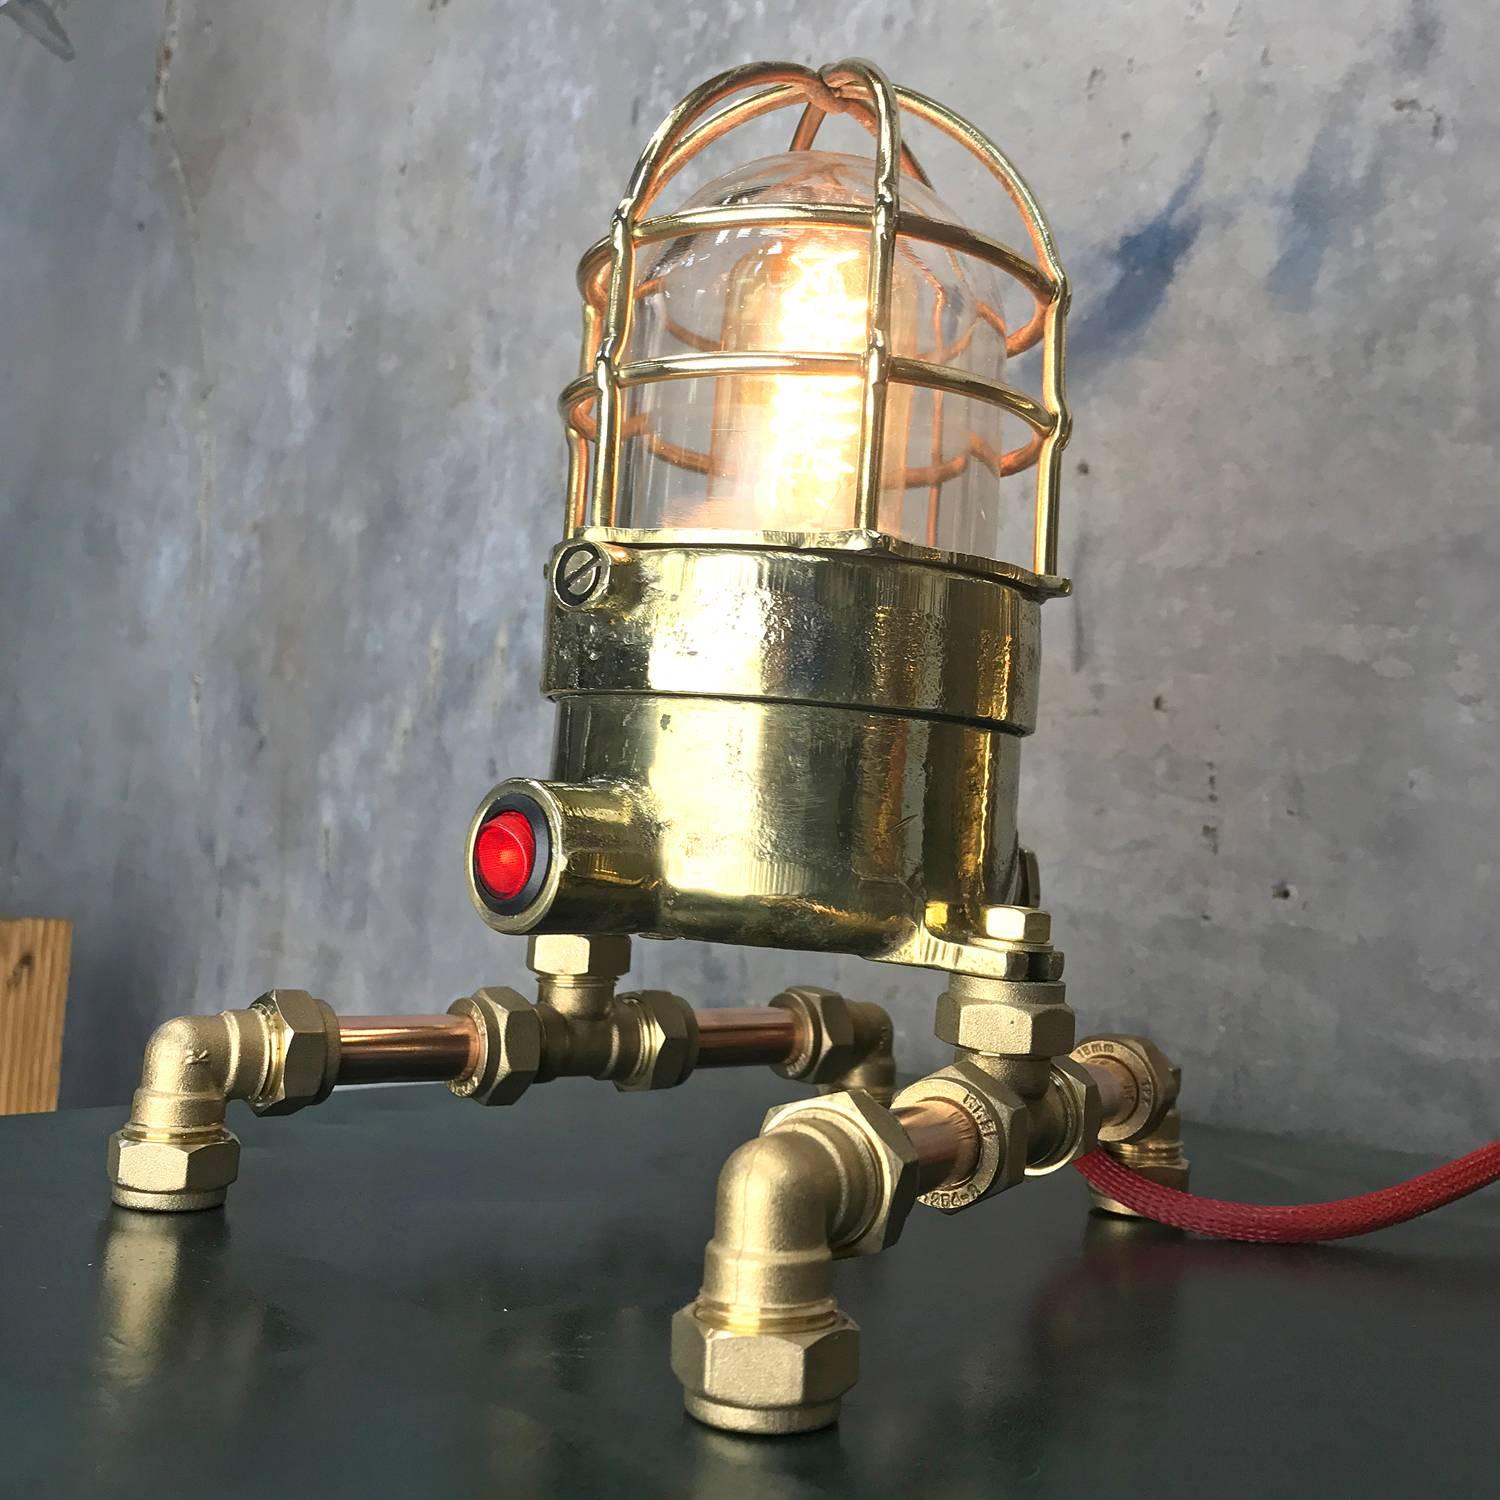 1970s Explosion proof passage way light reclaimed from a super tanker modified to function as a table or desk lamp.

The light itself is made from bronze, brass and has a tempered glass dome and protective cage.

These lights were manufactured